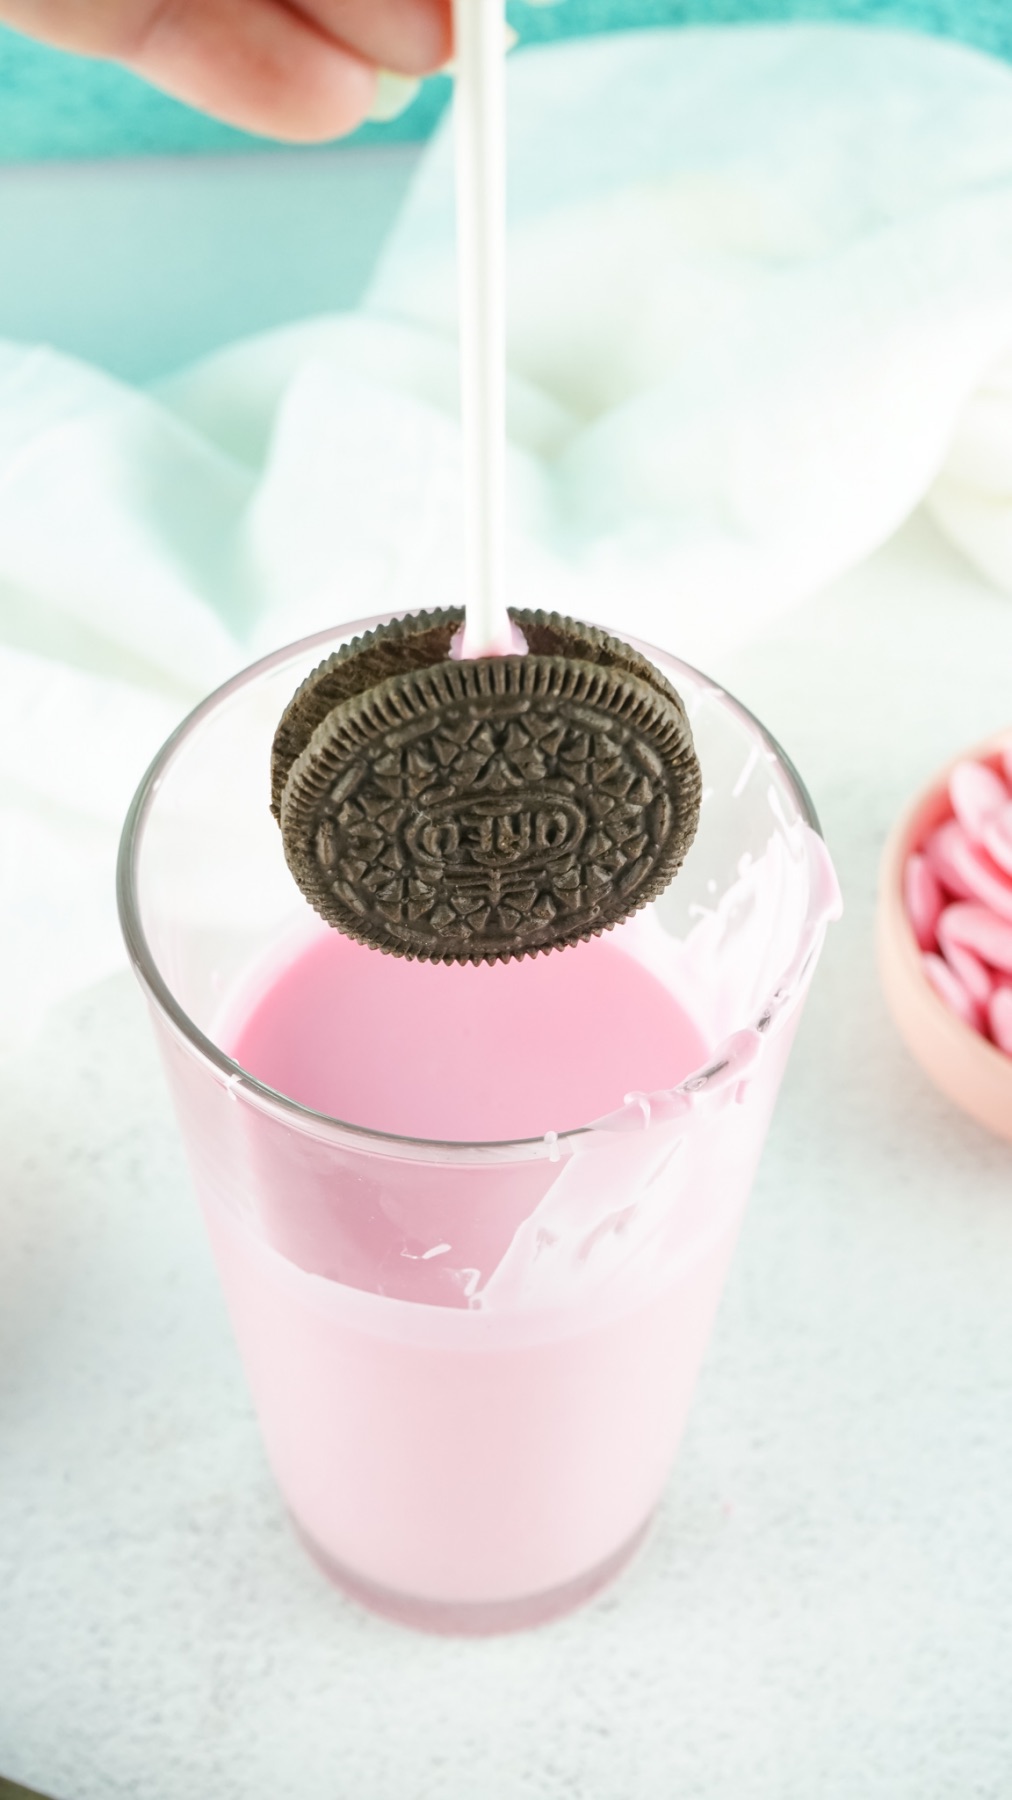 dip the oreo cookies in the pink chocolate